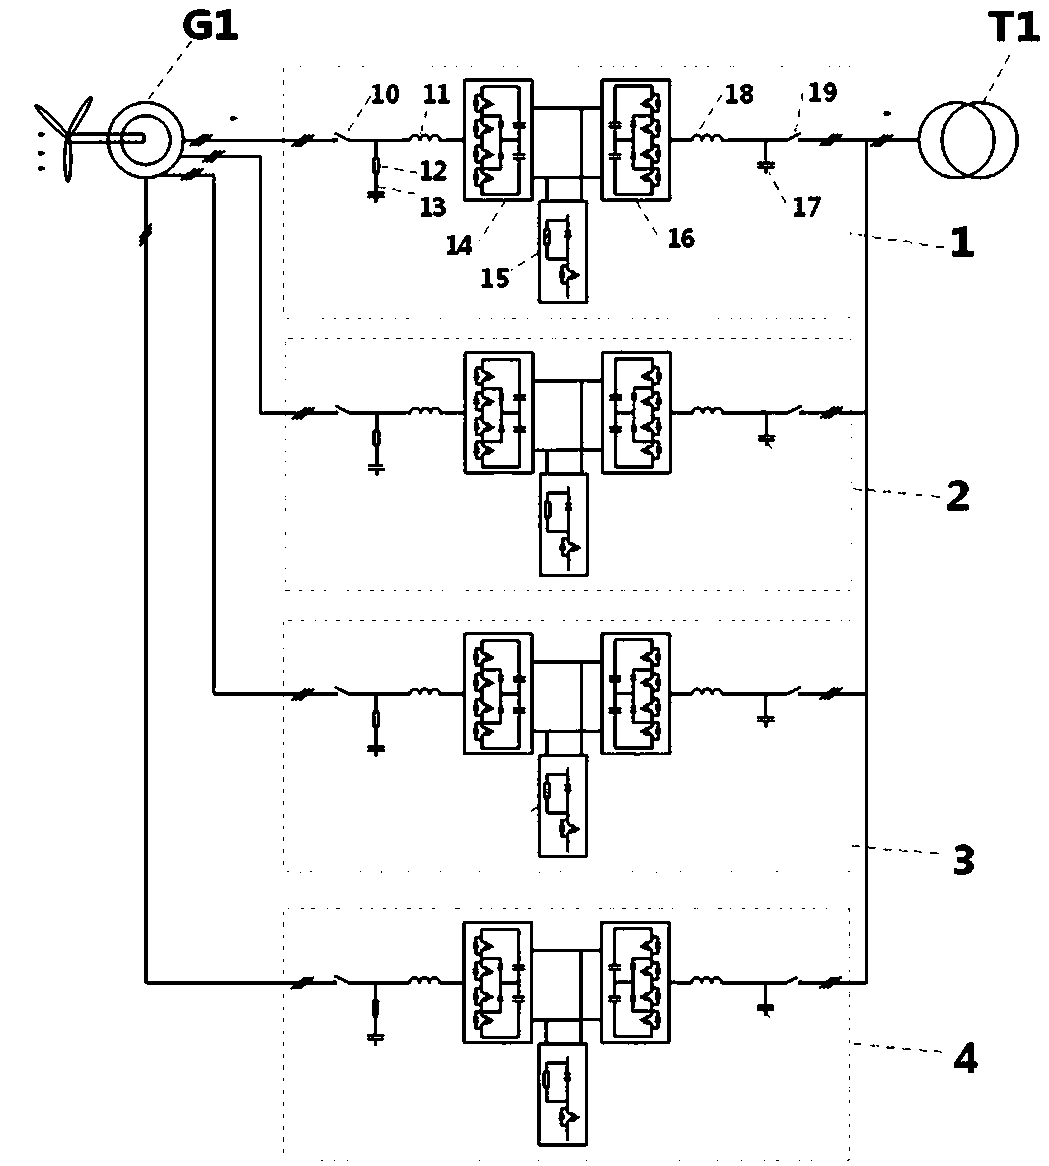 High-power converter circuit topology for offshore wind power